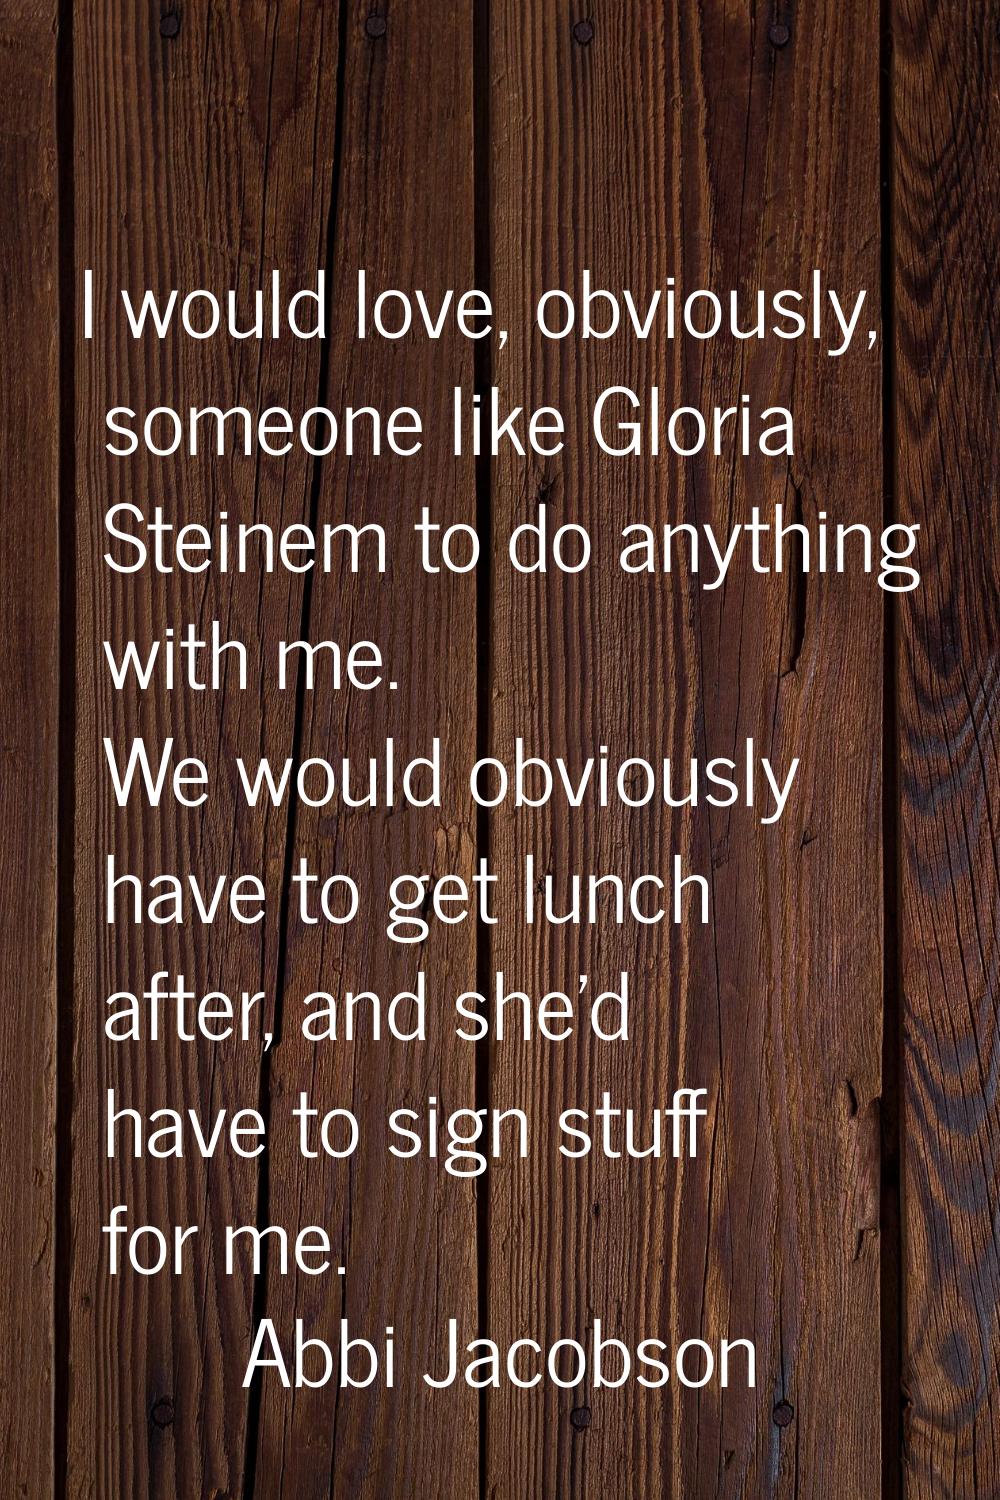 I would love, obviously, someone like Gloria Steinem to do anything with me. We would obviously hav